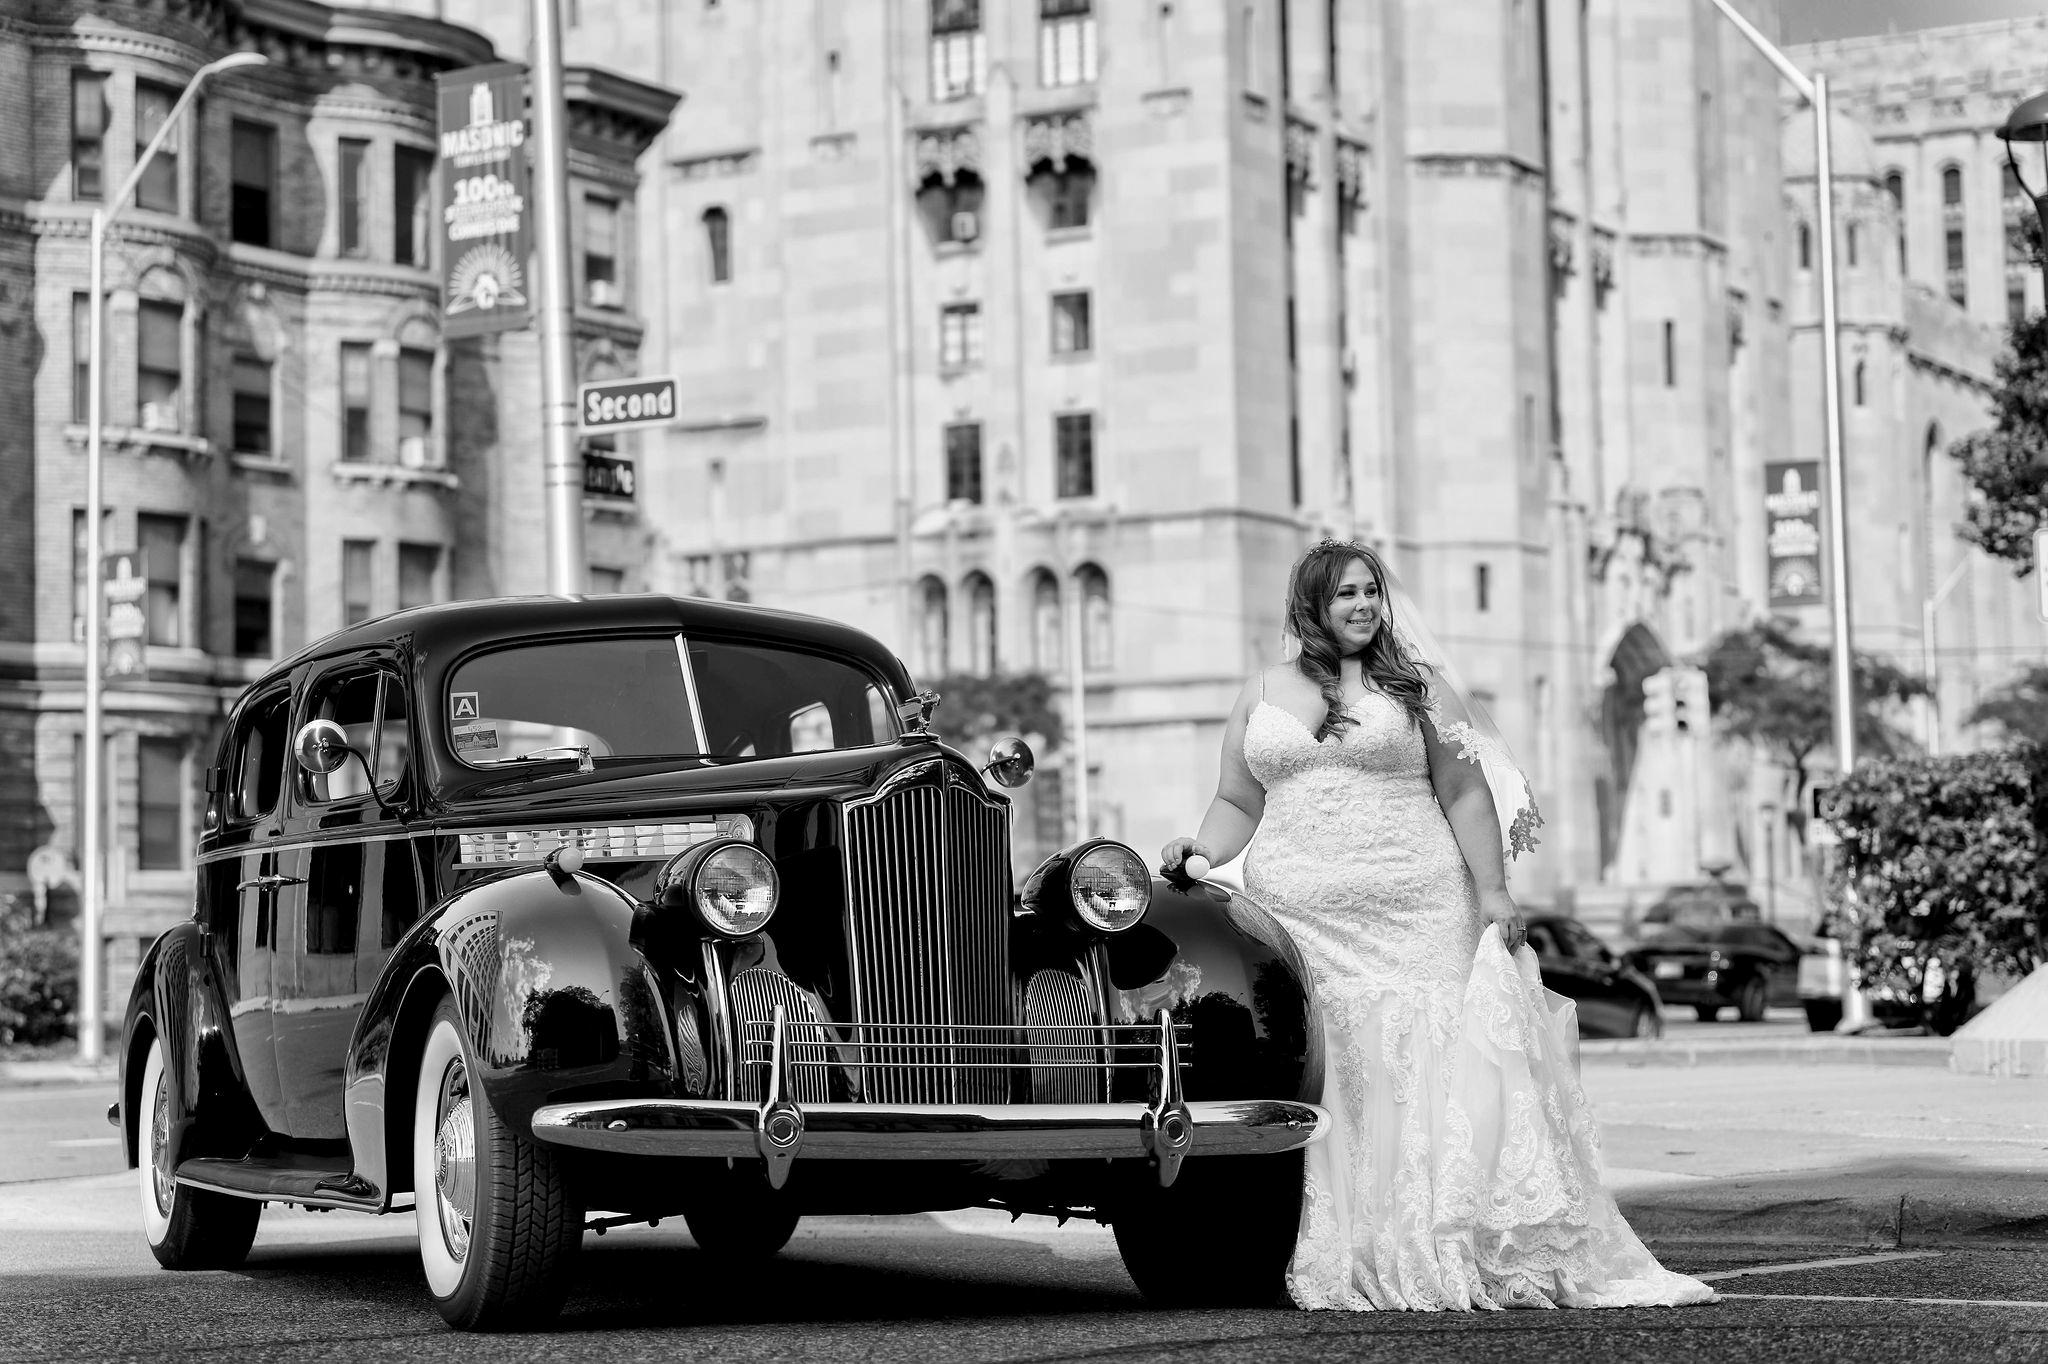 A bride poses with a classic car on the streets of Detroit near the Masonic Temple.